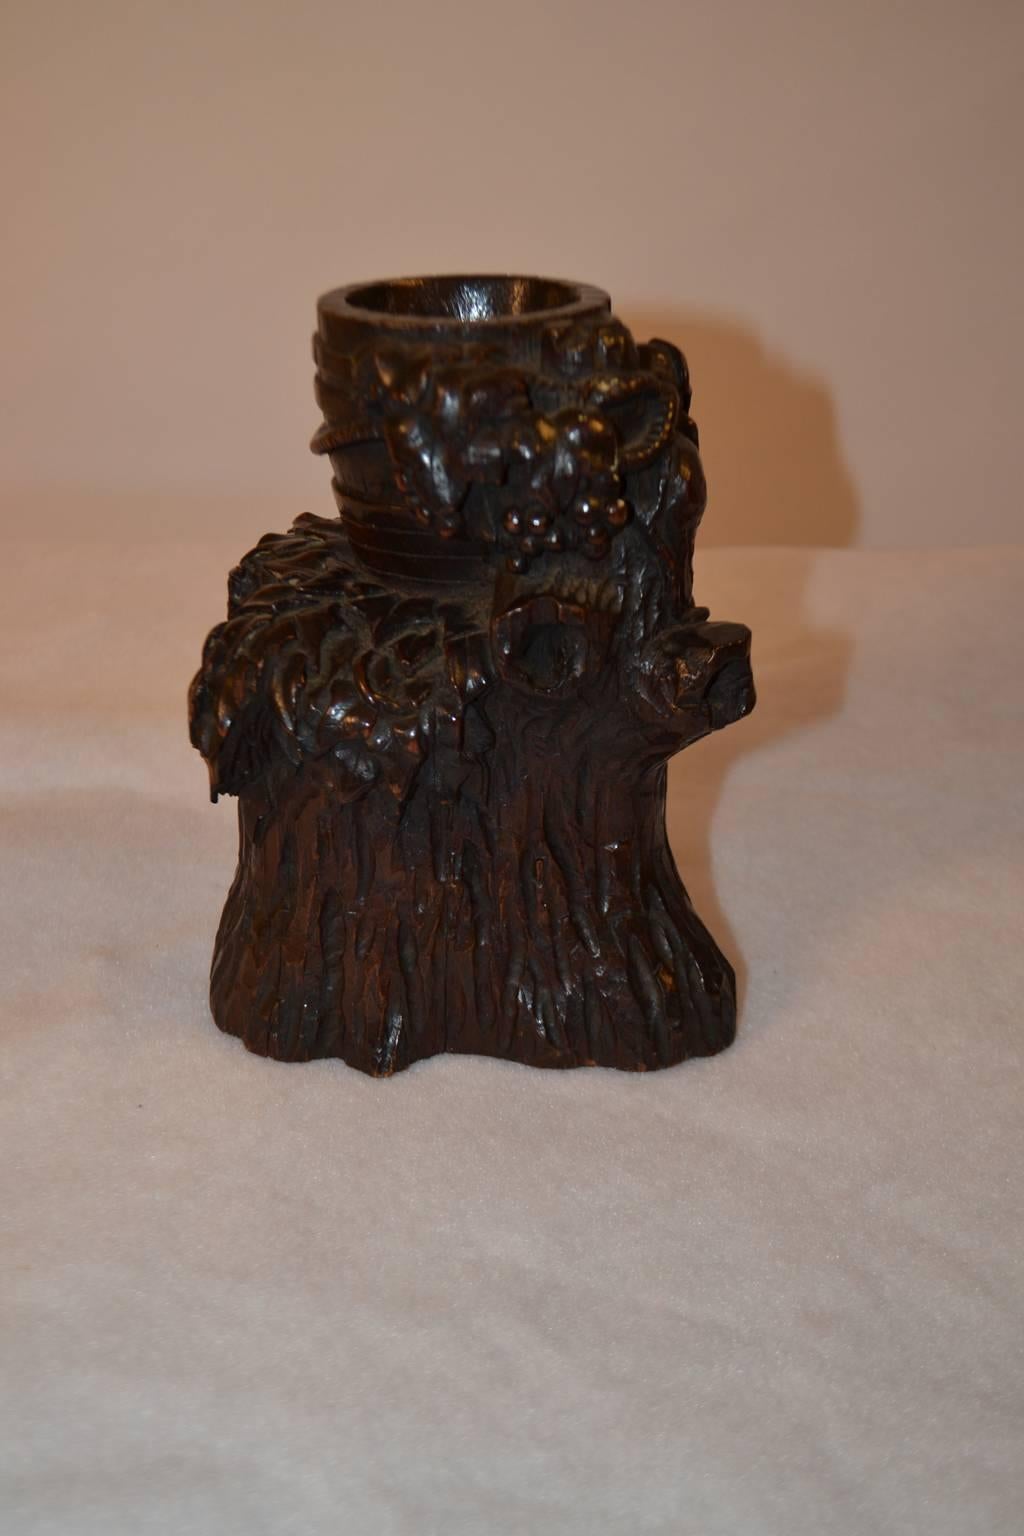 Carved Black Forest Carving of Bucket of Grapes, Stump For Sale